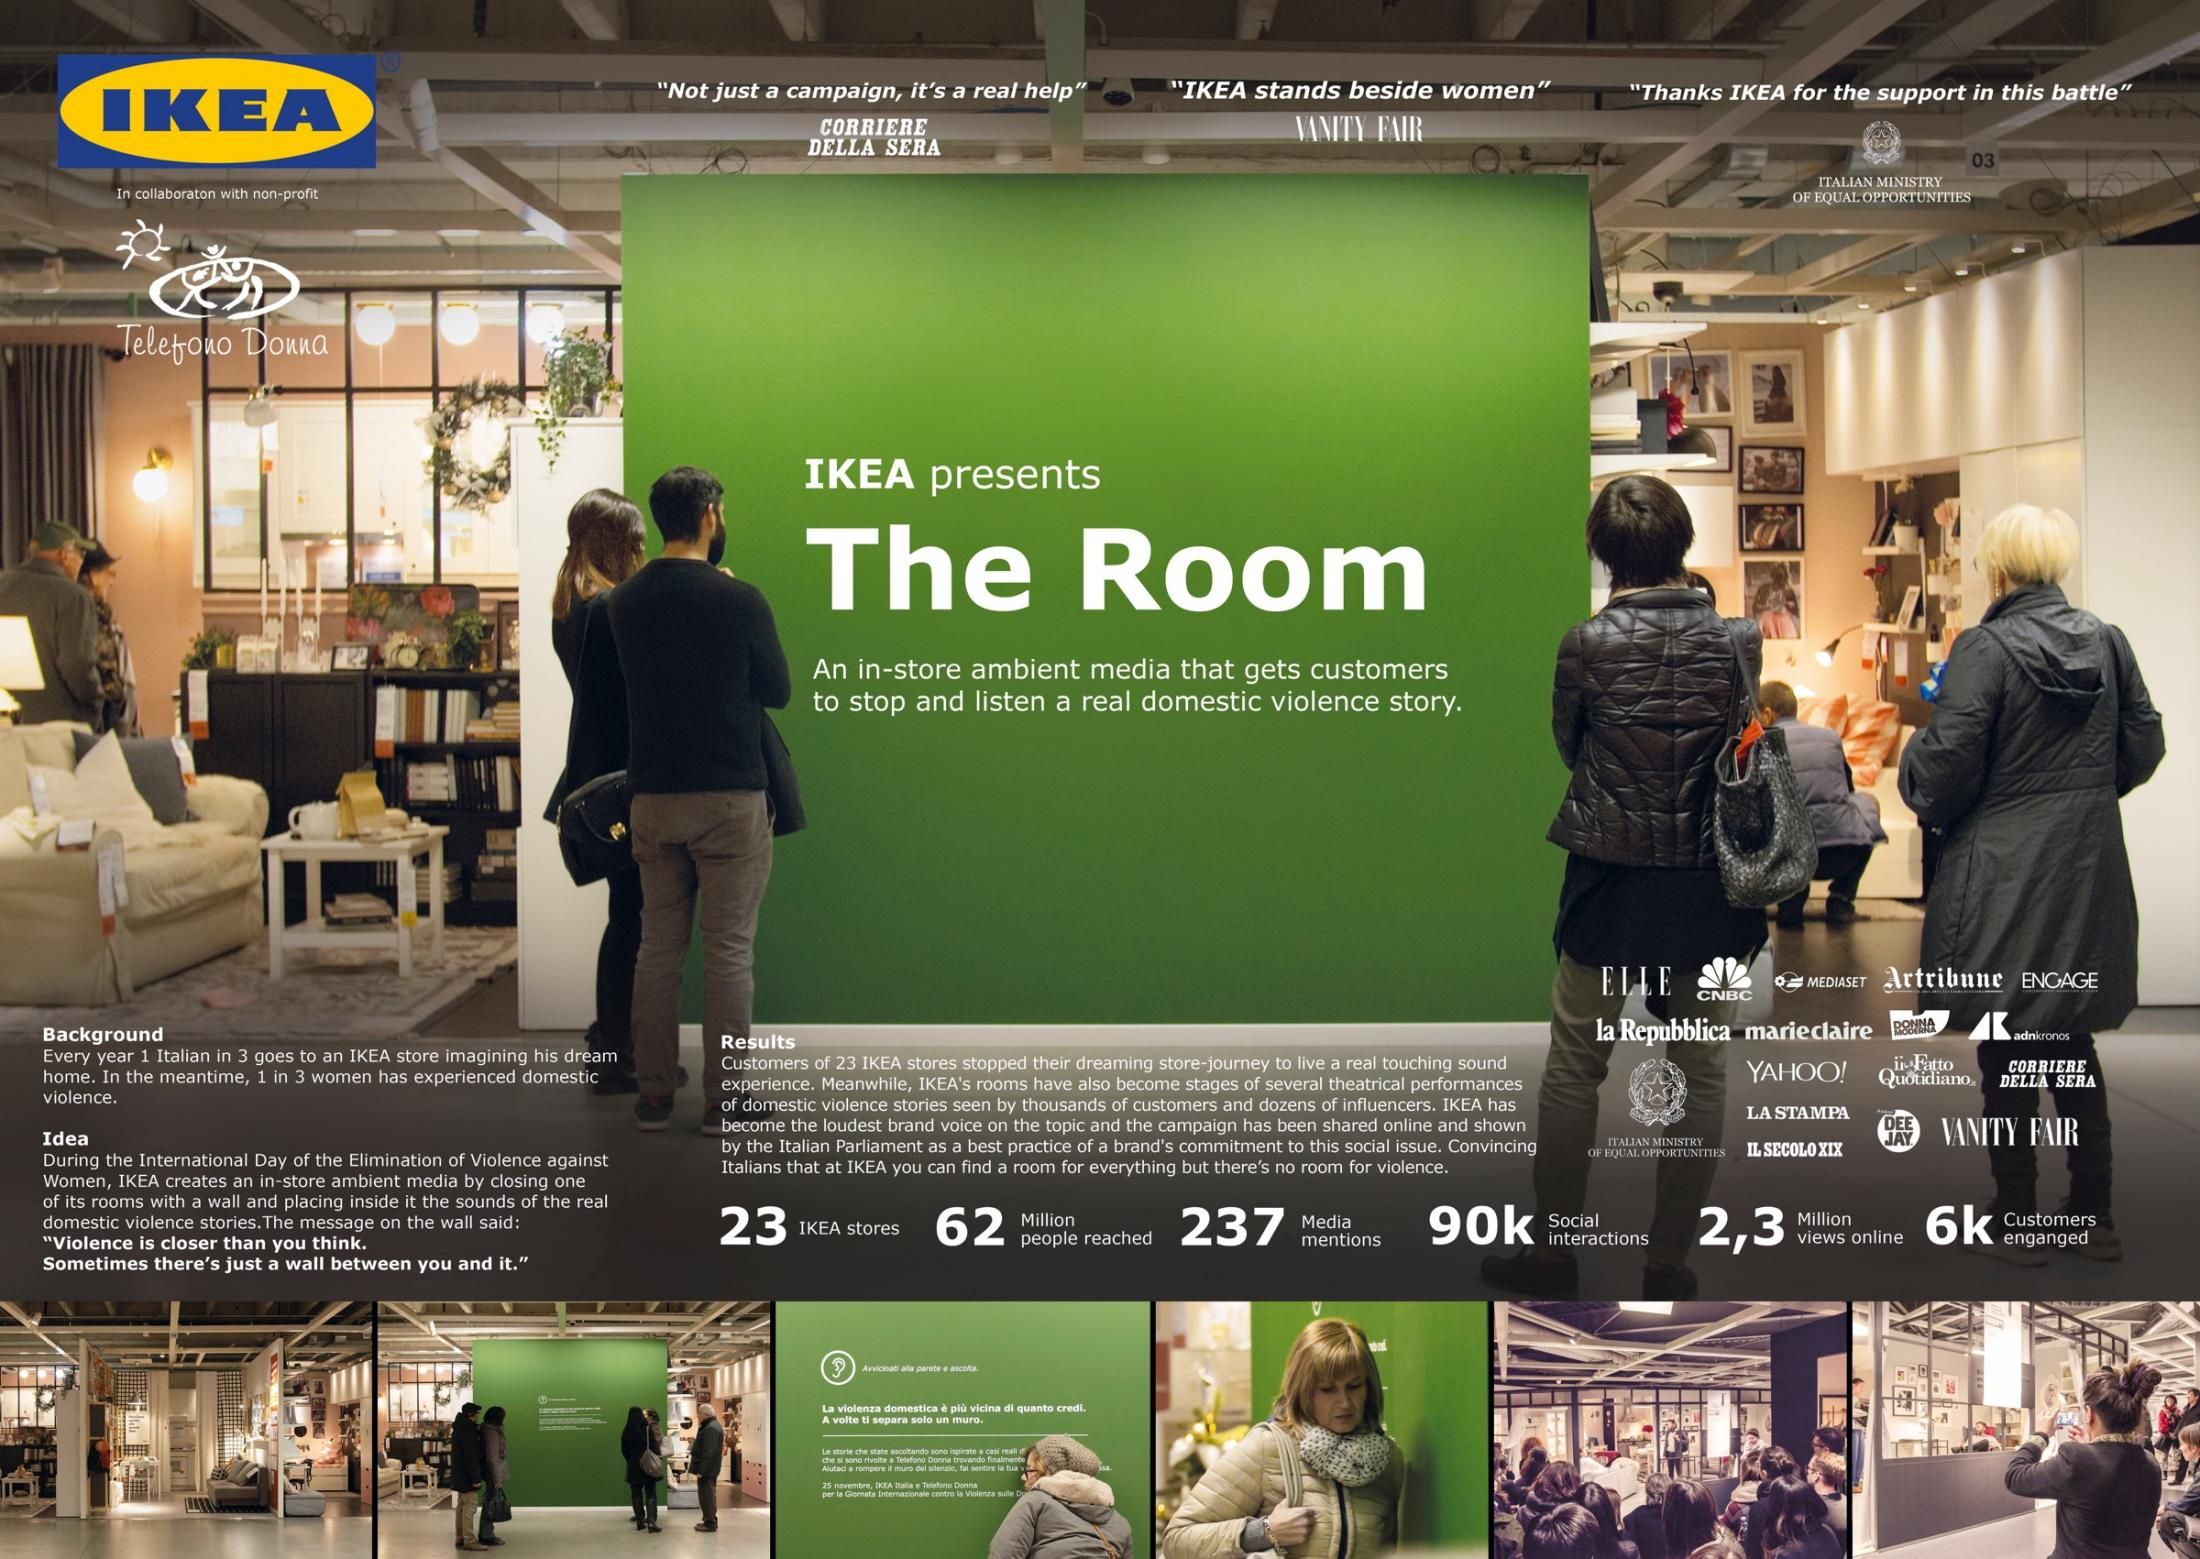  Ikea's green-marketing example for encouraging consumers to be environmentally-conscious